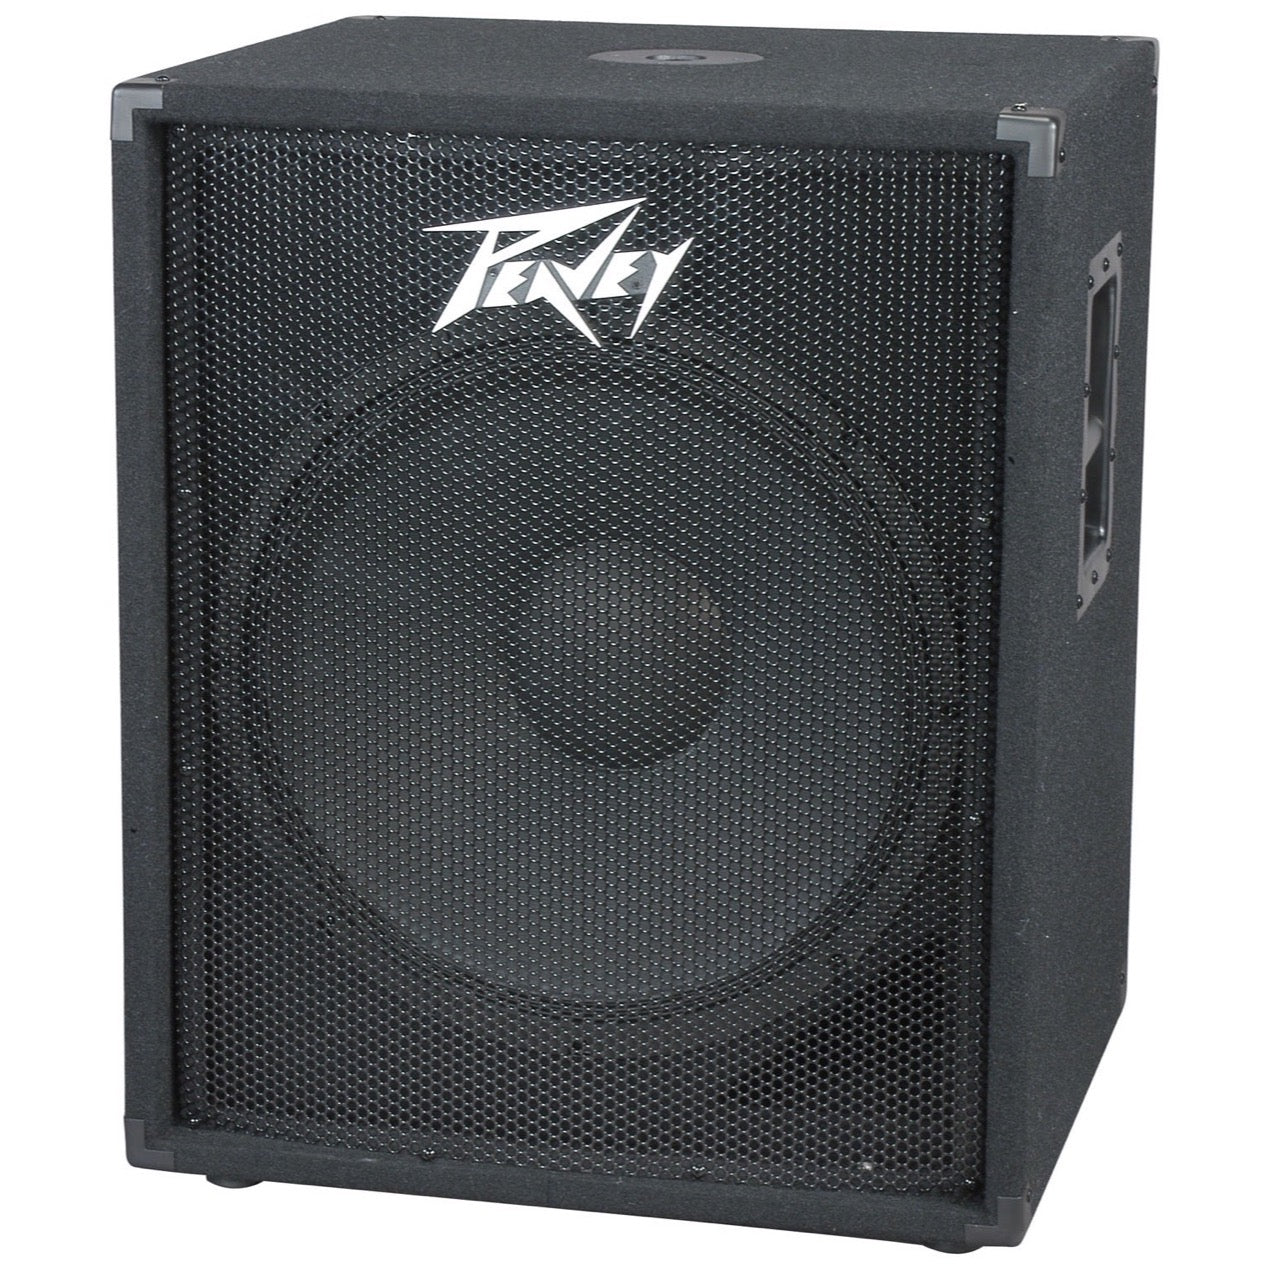 Peavey PV118 Passive, Unpowered Subwoofer (1x18 Inch)